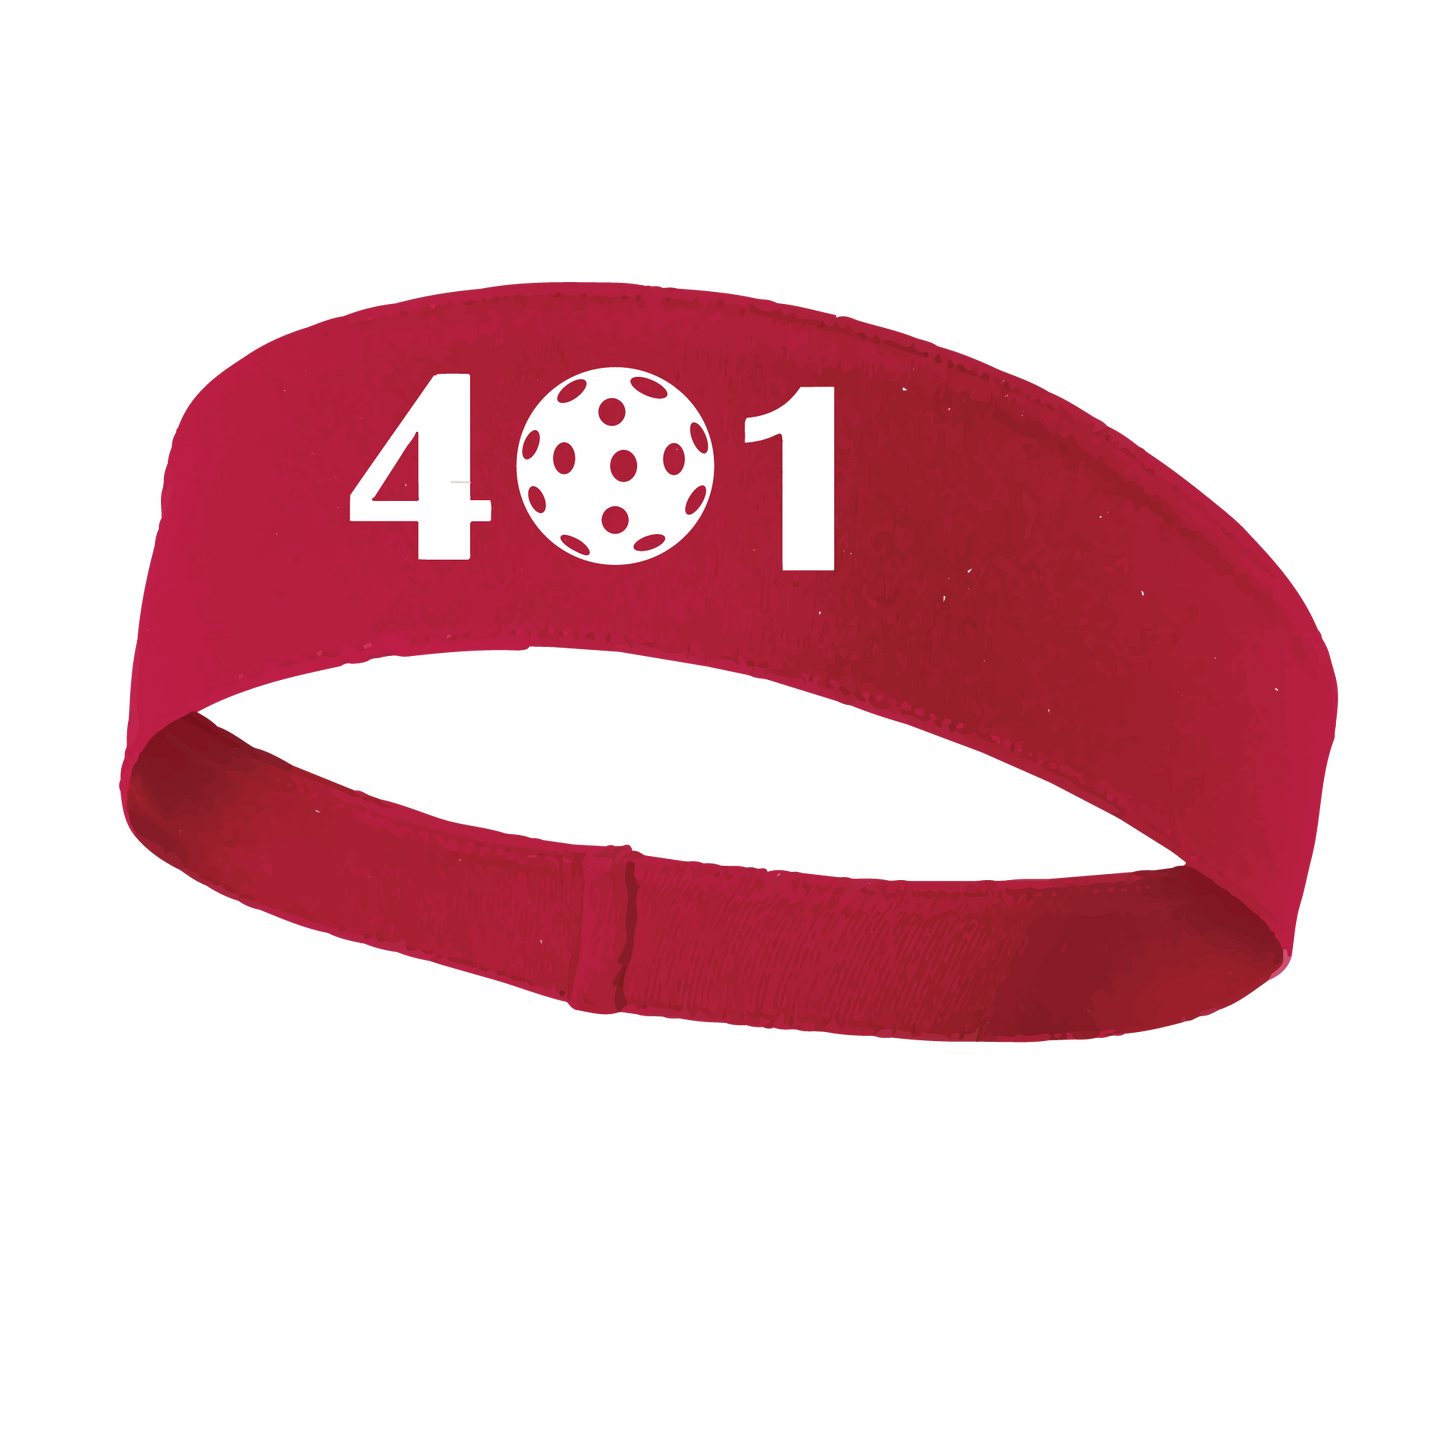 Design: 401 Rhode Island Pickleball Club  This fun, pickleball designed, moisture-wicking headband narrows in the back to fit more securely. Single-needle top-stitched edging. These headbands come in a variety of colors. Truly shows your love for the sport of pickleball!!